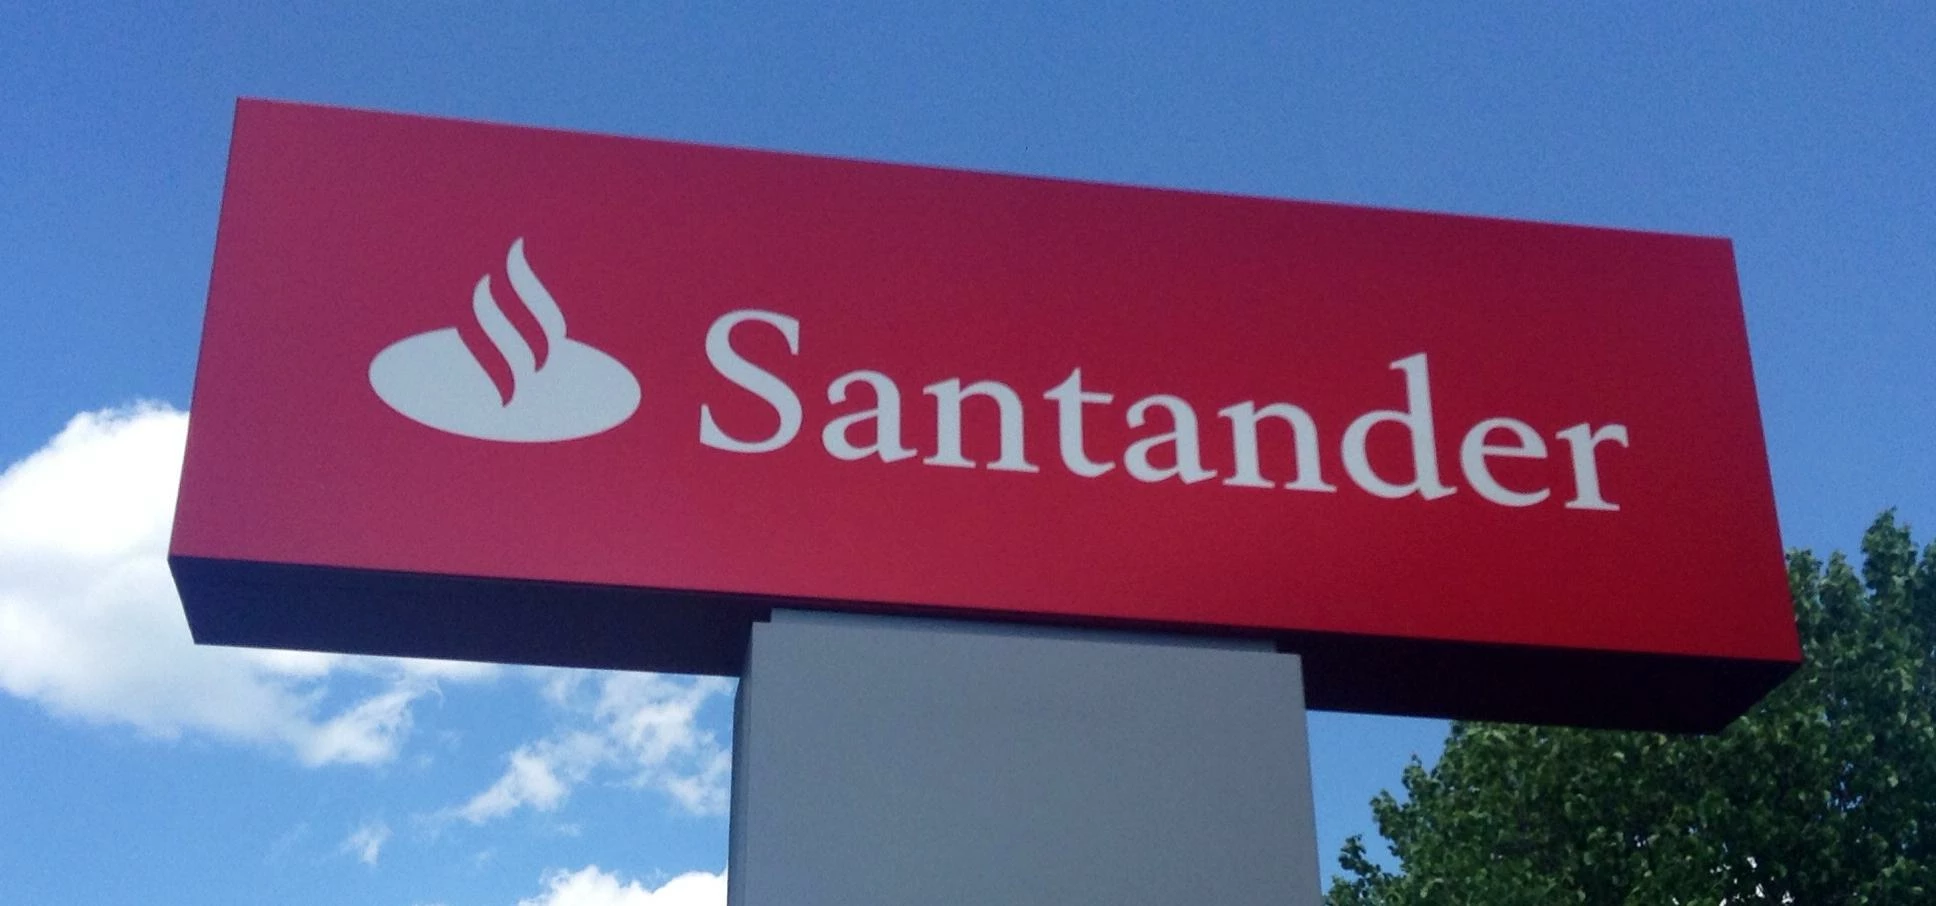 Santander Bank Sign Logo pics by Mike Mozart of TheToyChannel and JeepersMedia on YouTube. #Santande